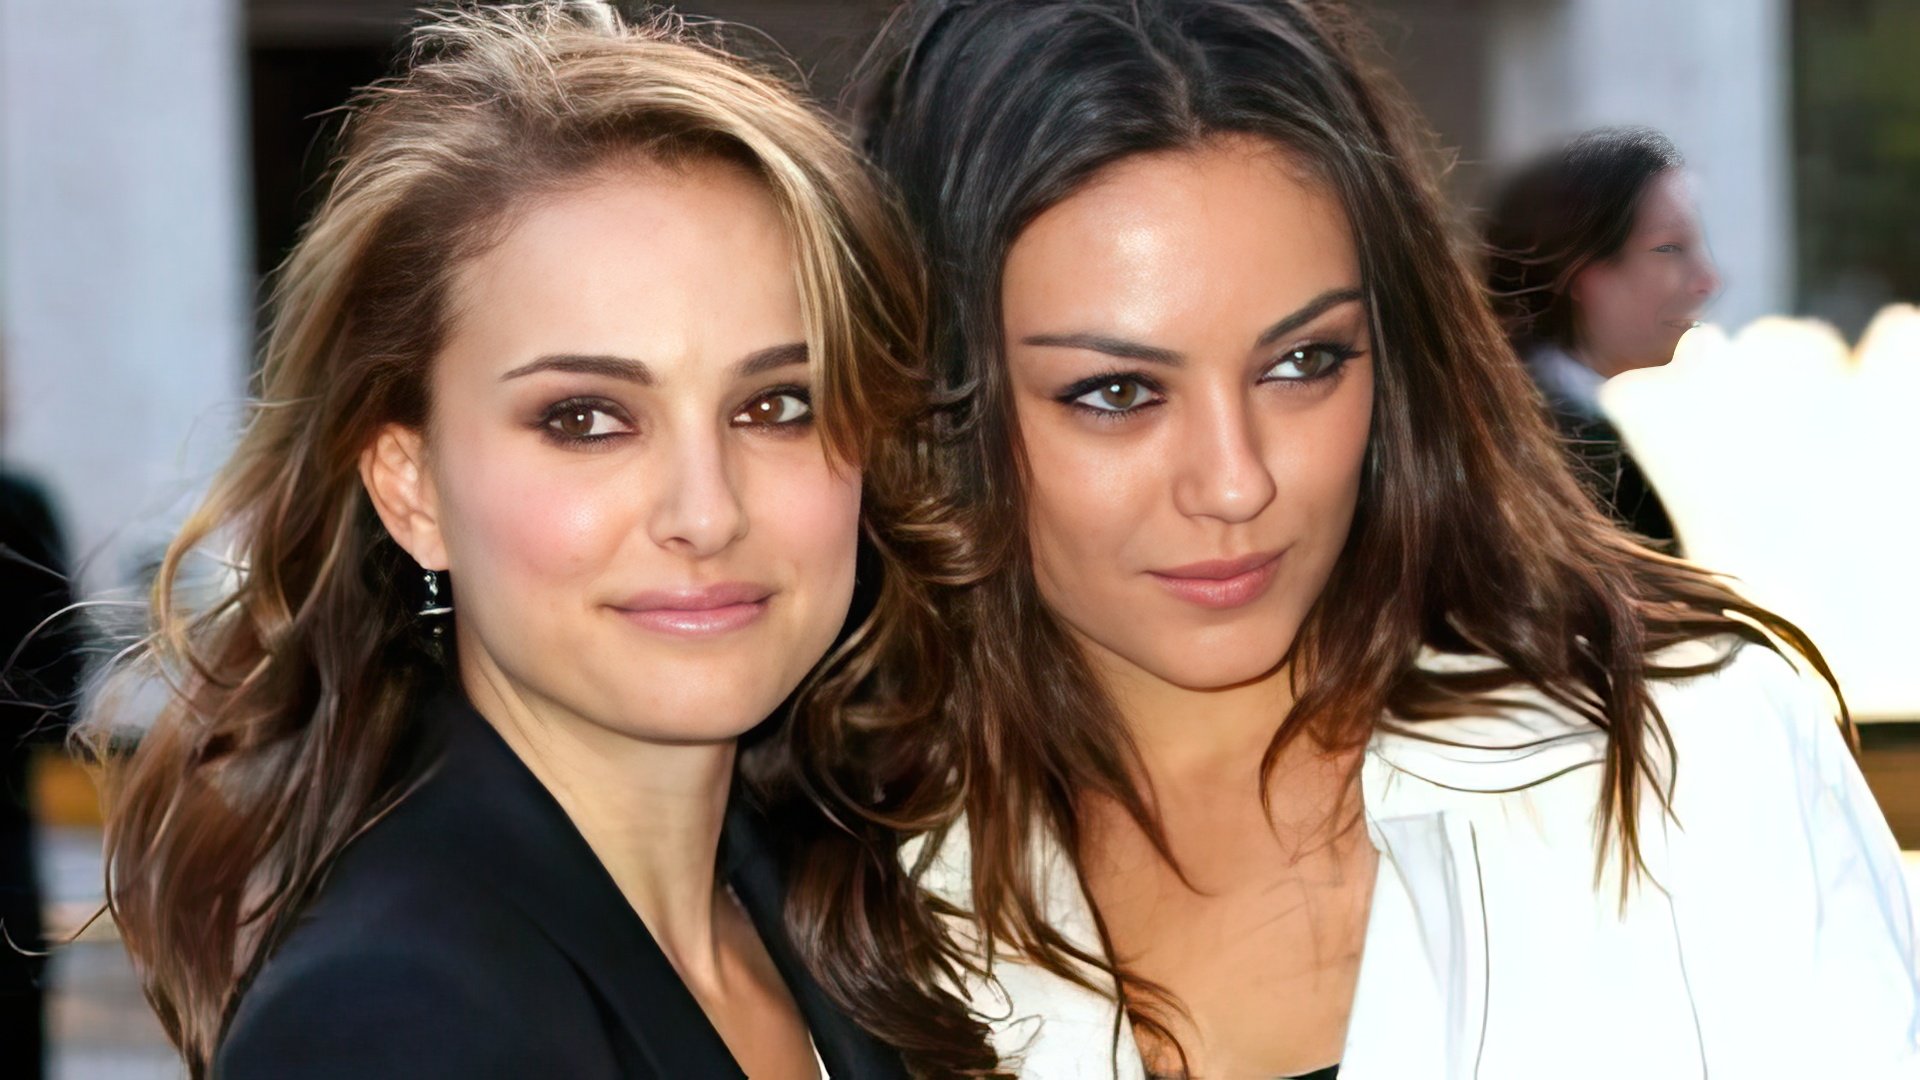 In Real Life, Mila Kunis and Natalie Portman are Friends